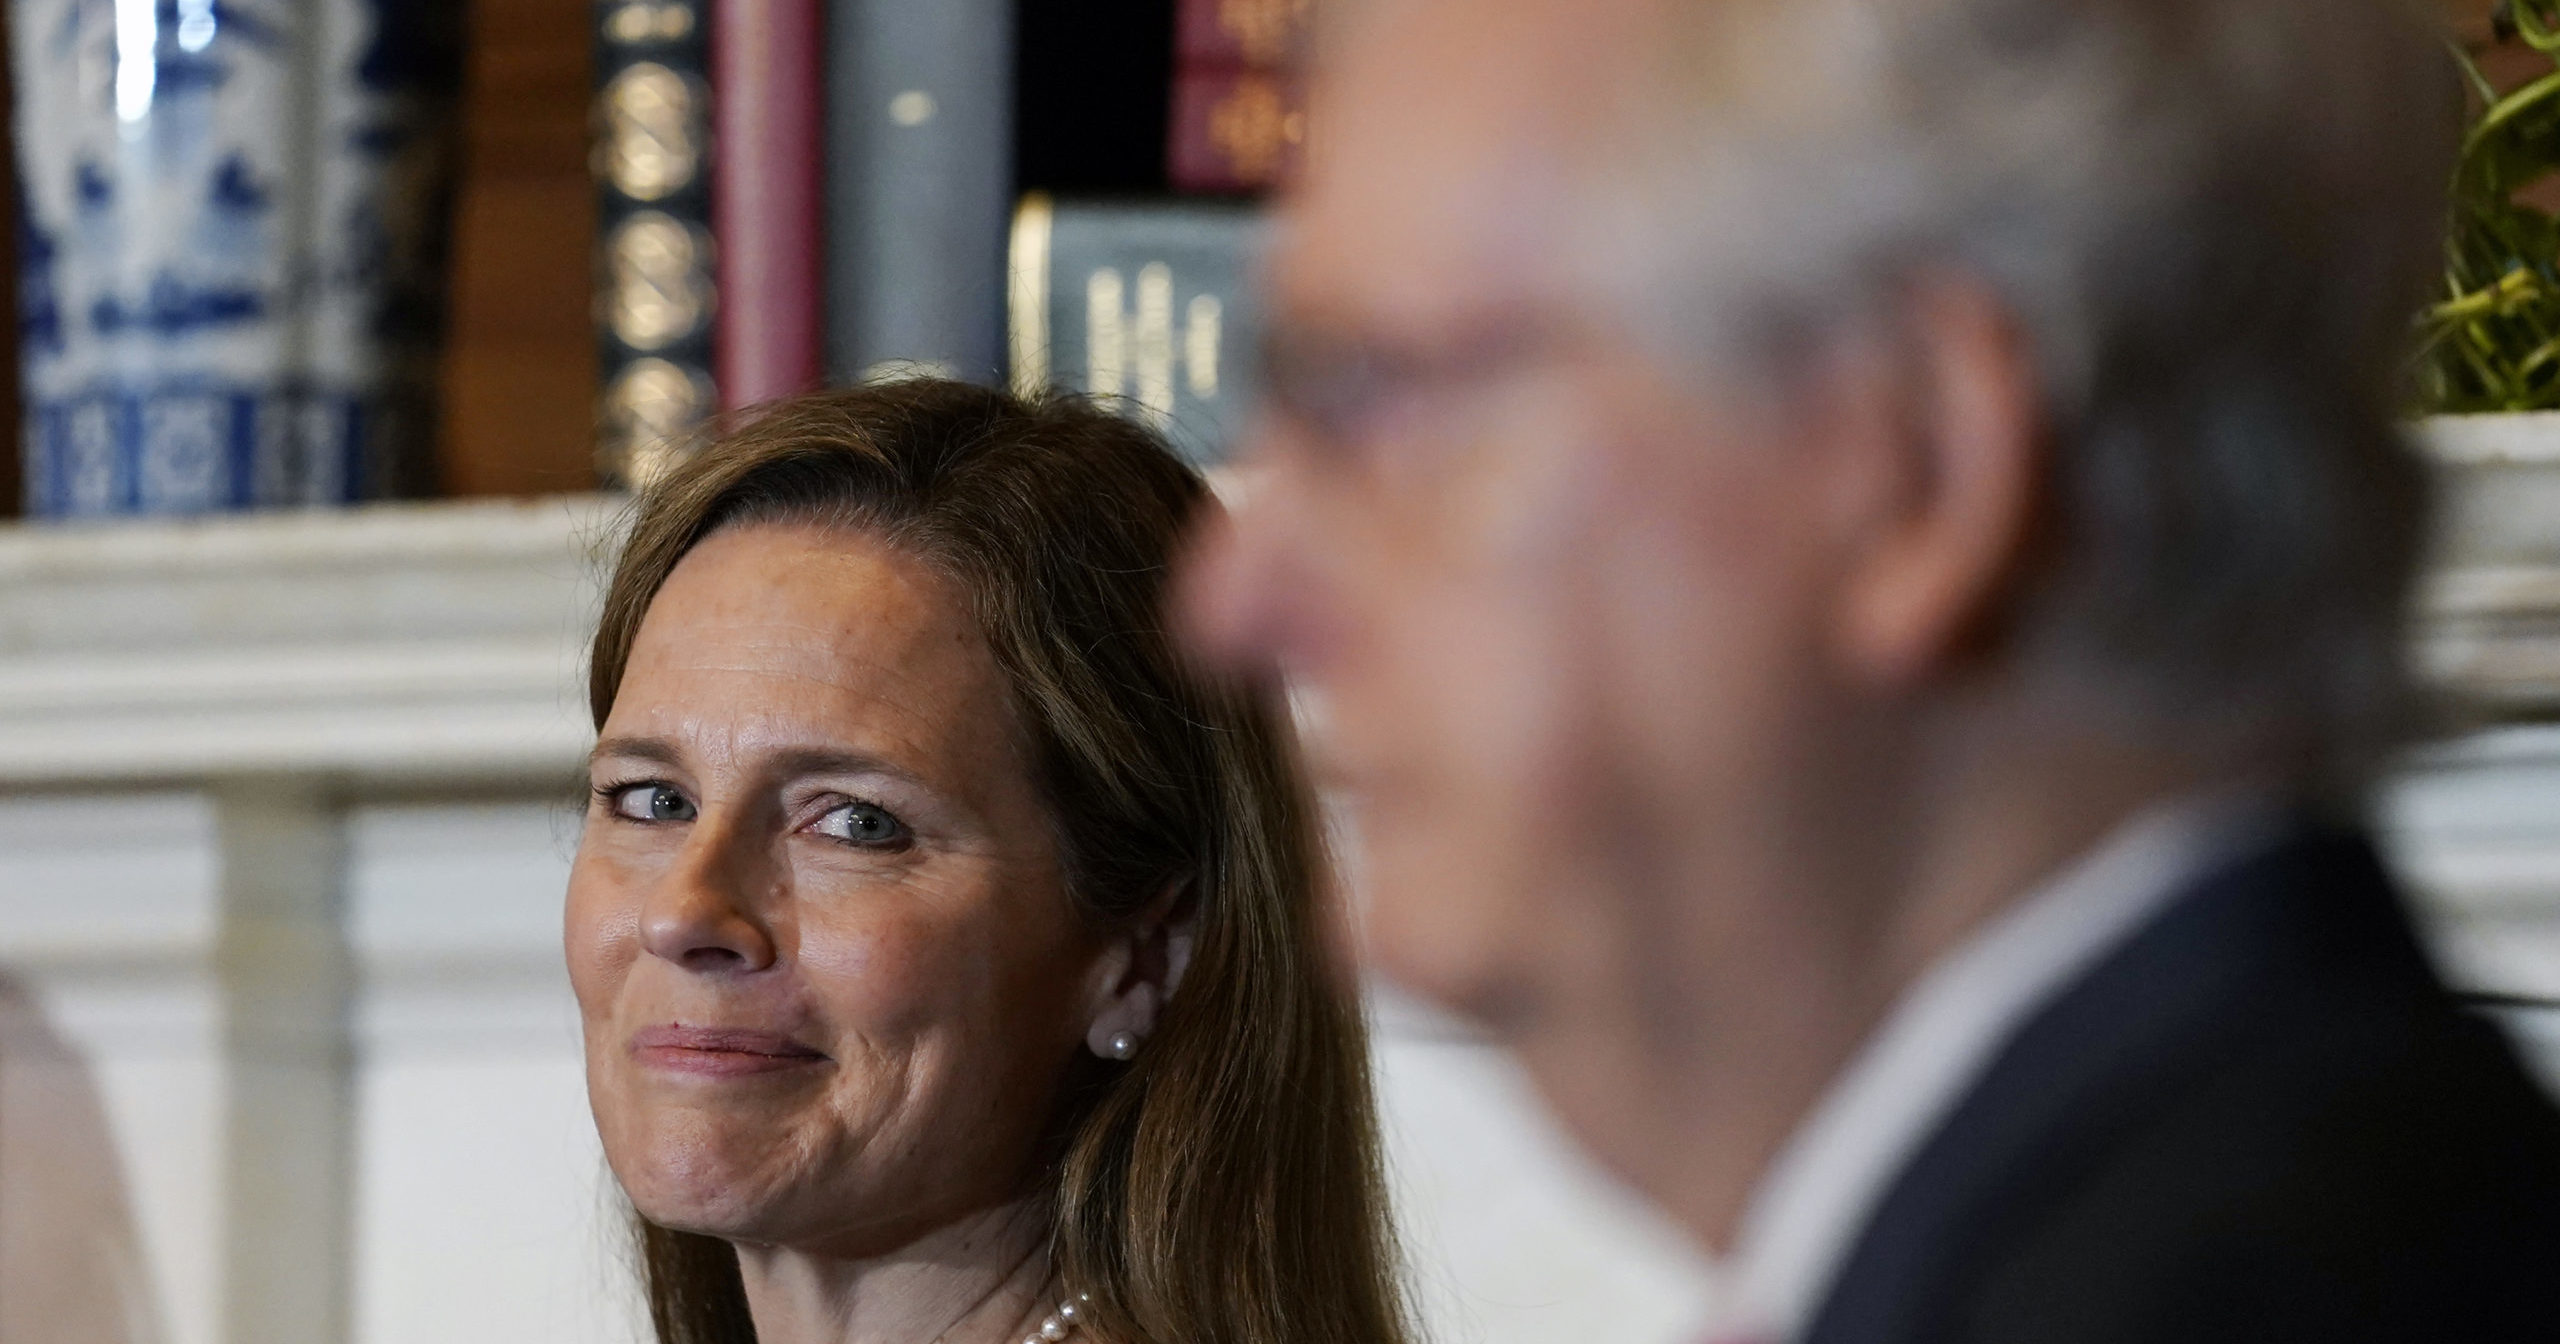 Supreme Court nominee Judge Amy Coney Barrett looks over to Senate Majority Leader Mitch McConnell of Kentucky as they meet on Capitol Hill in Washington on Sept. 29, 2020.